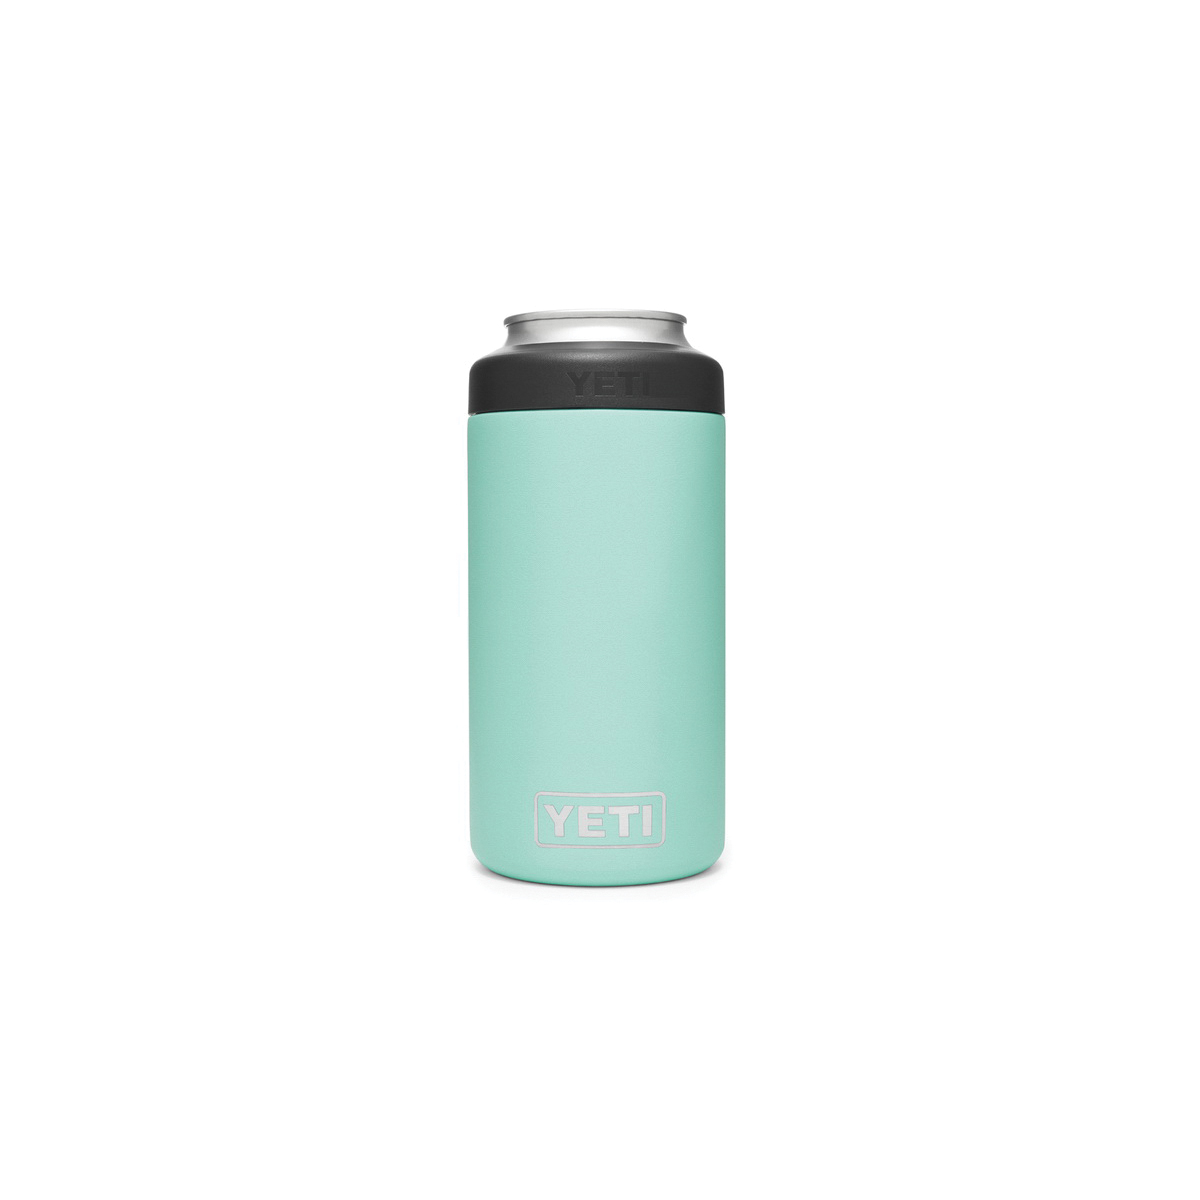 YETI Rambler 21070090050 Colster Can Insulator, 3 in Dia x 6 in H, 16 oz Can/Bottle, Stainless Steel, Seafoam - 1